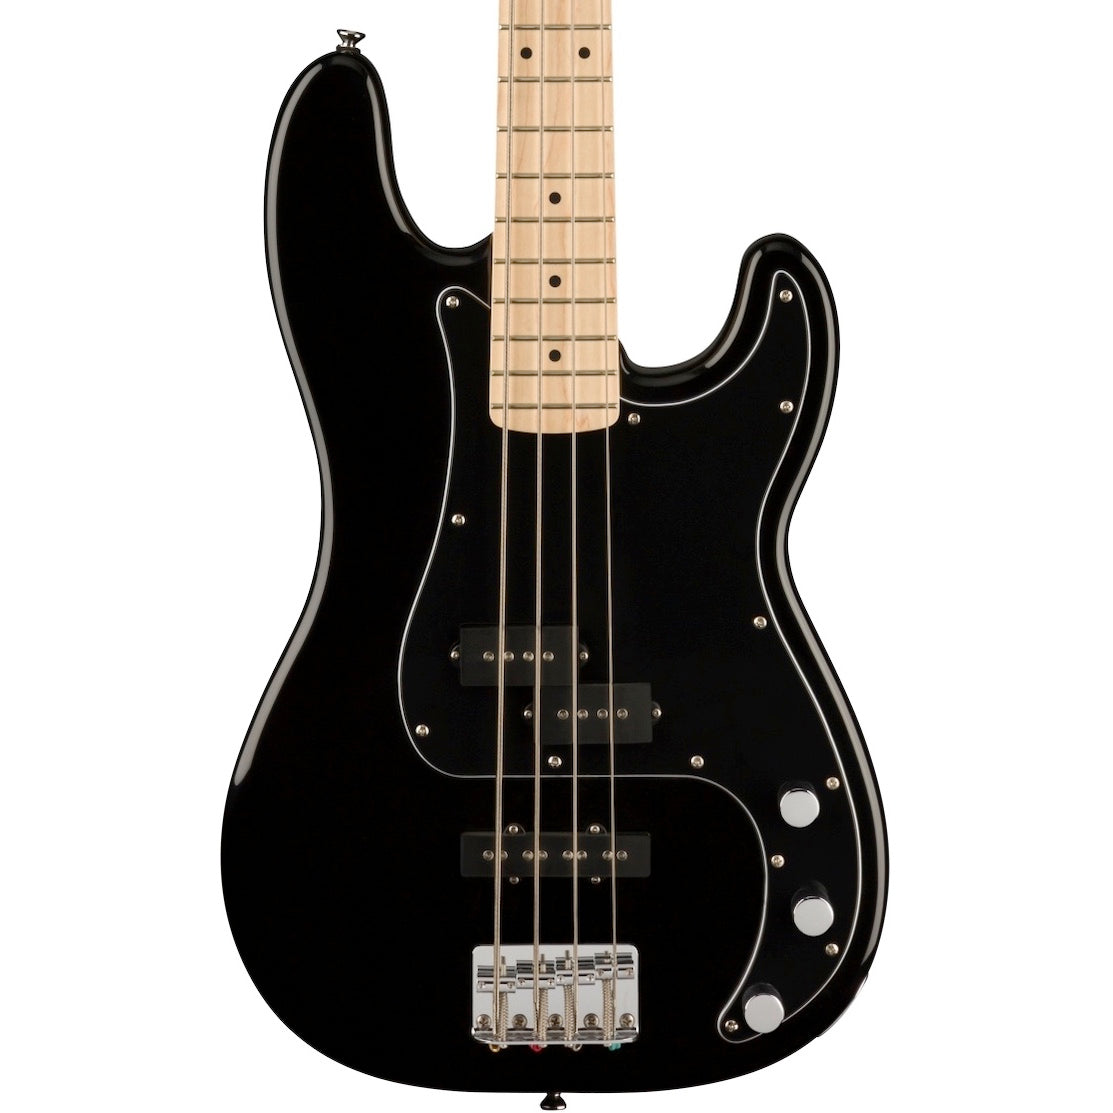 Fender Squier Affinity Series Precision Bass PJ Black | Music Experience | Shop Online | South Africa